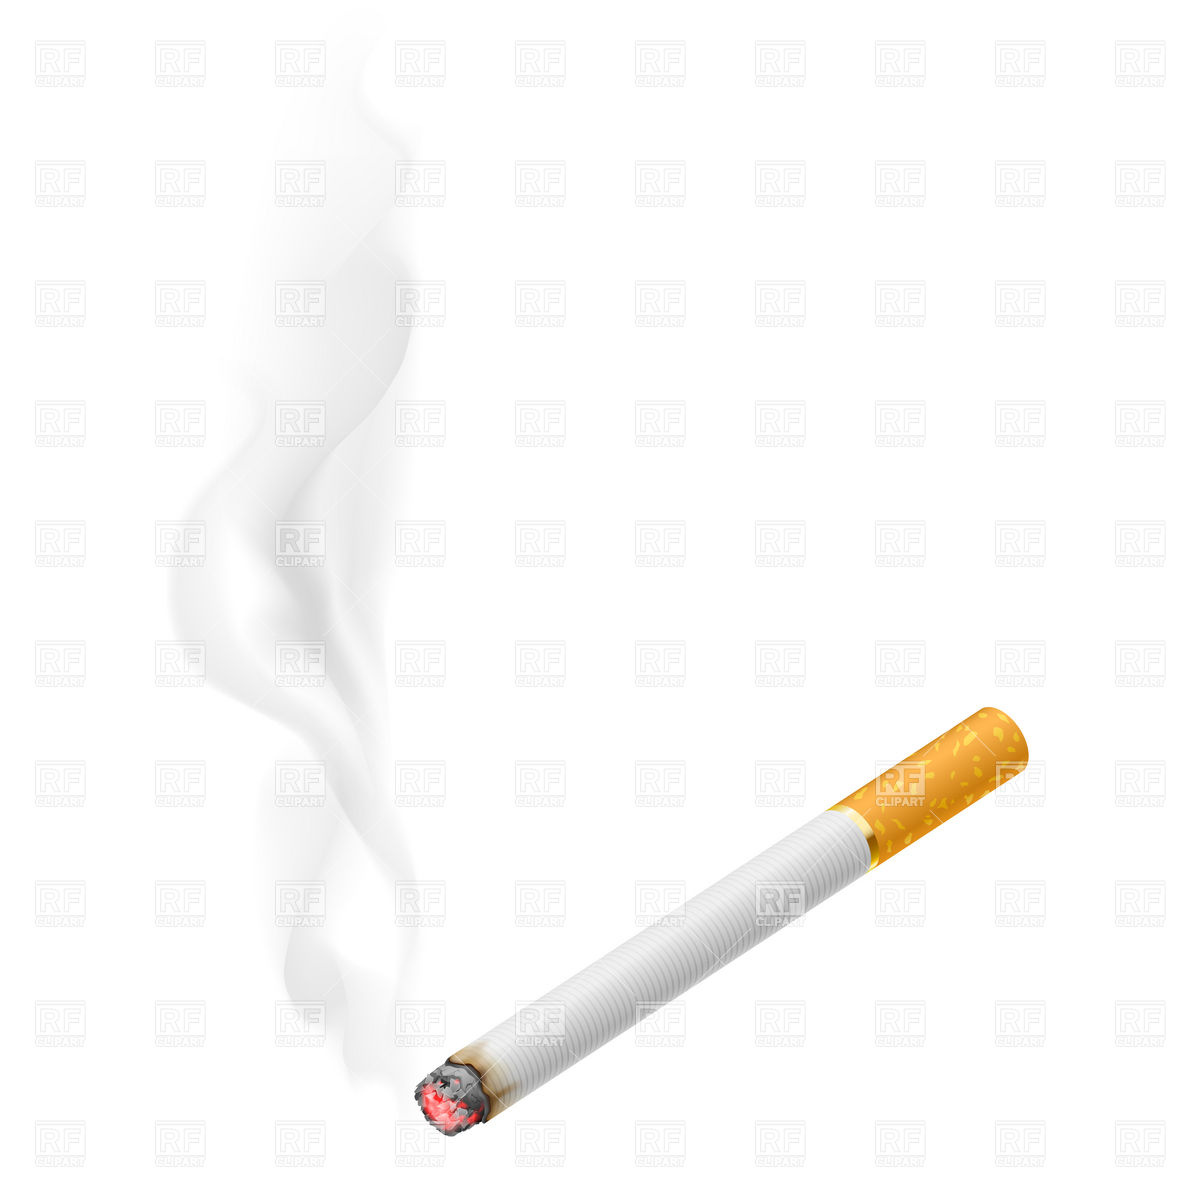 Cigarette With Smoke Download Royalty Free Vector Clipart  Eps